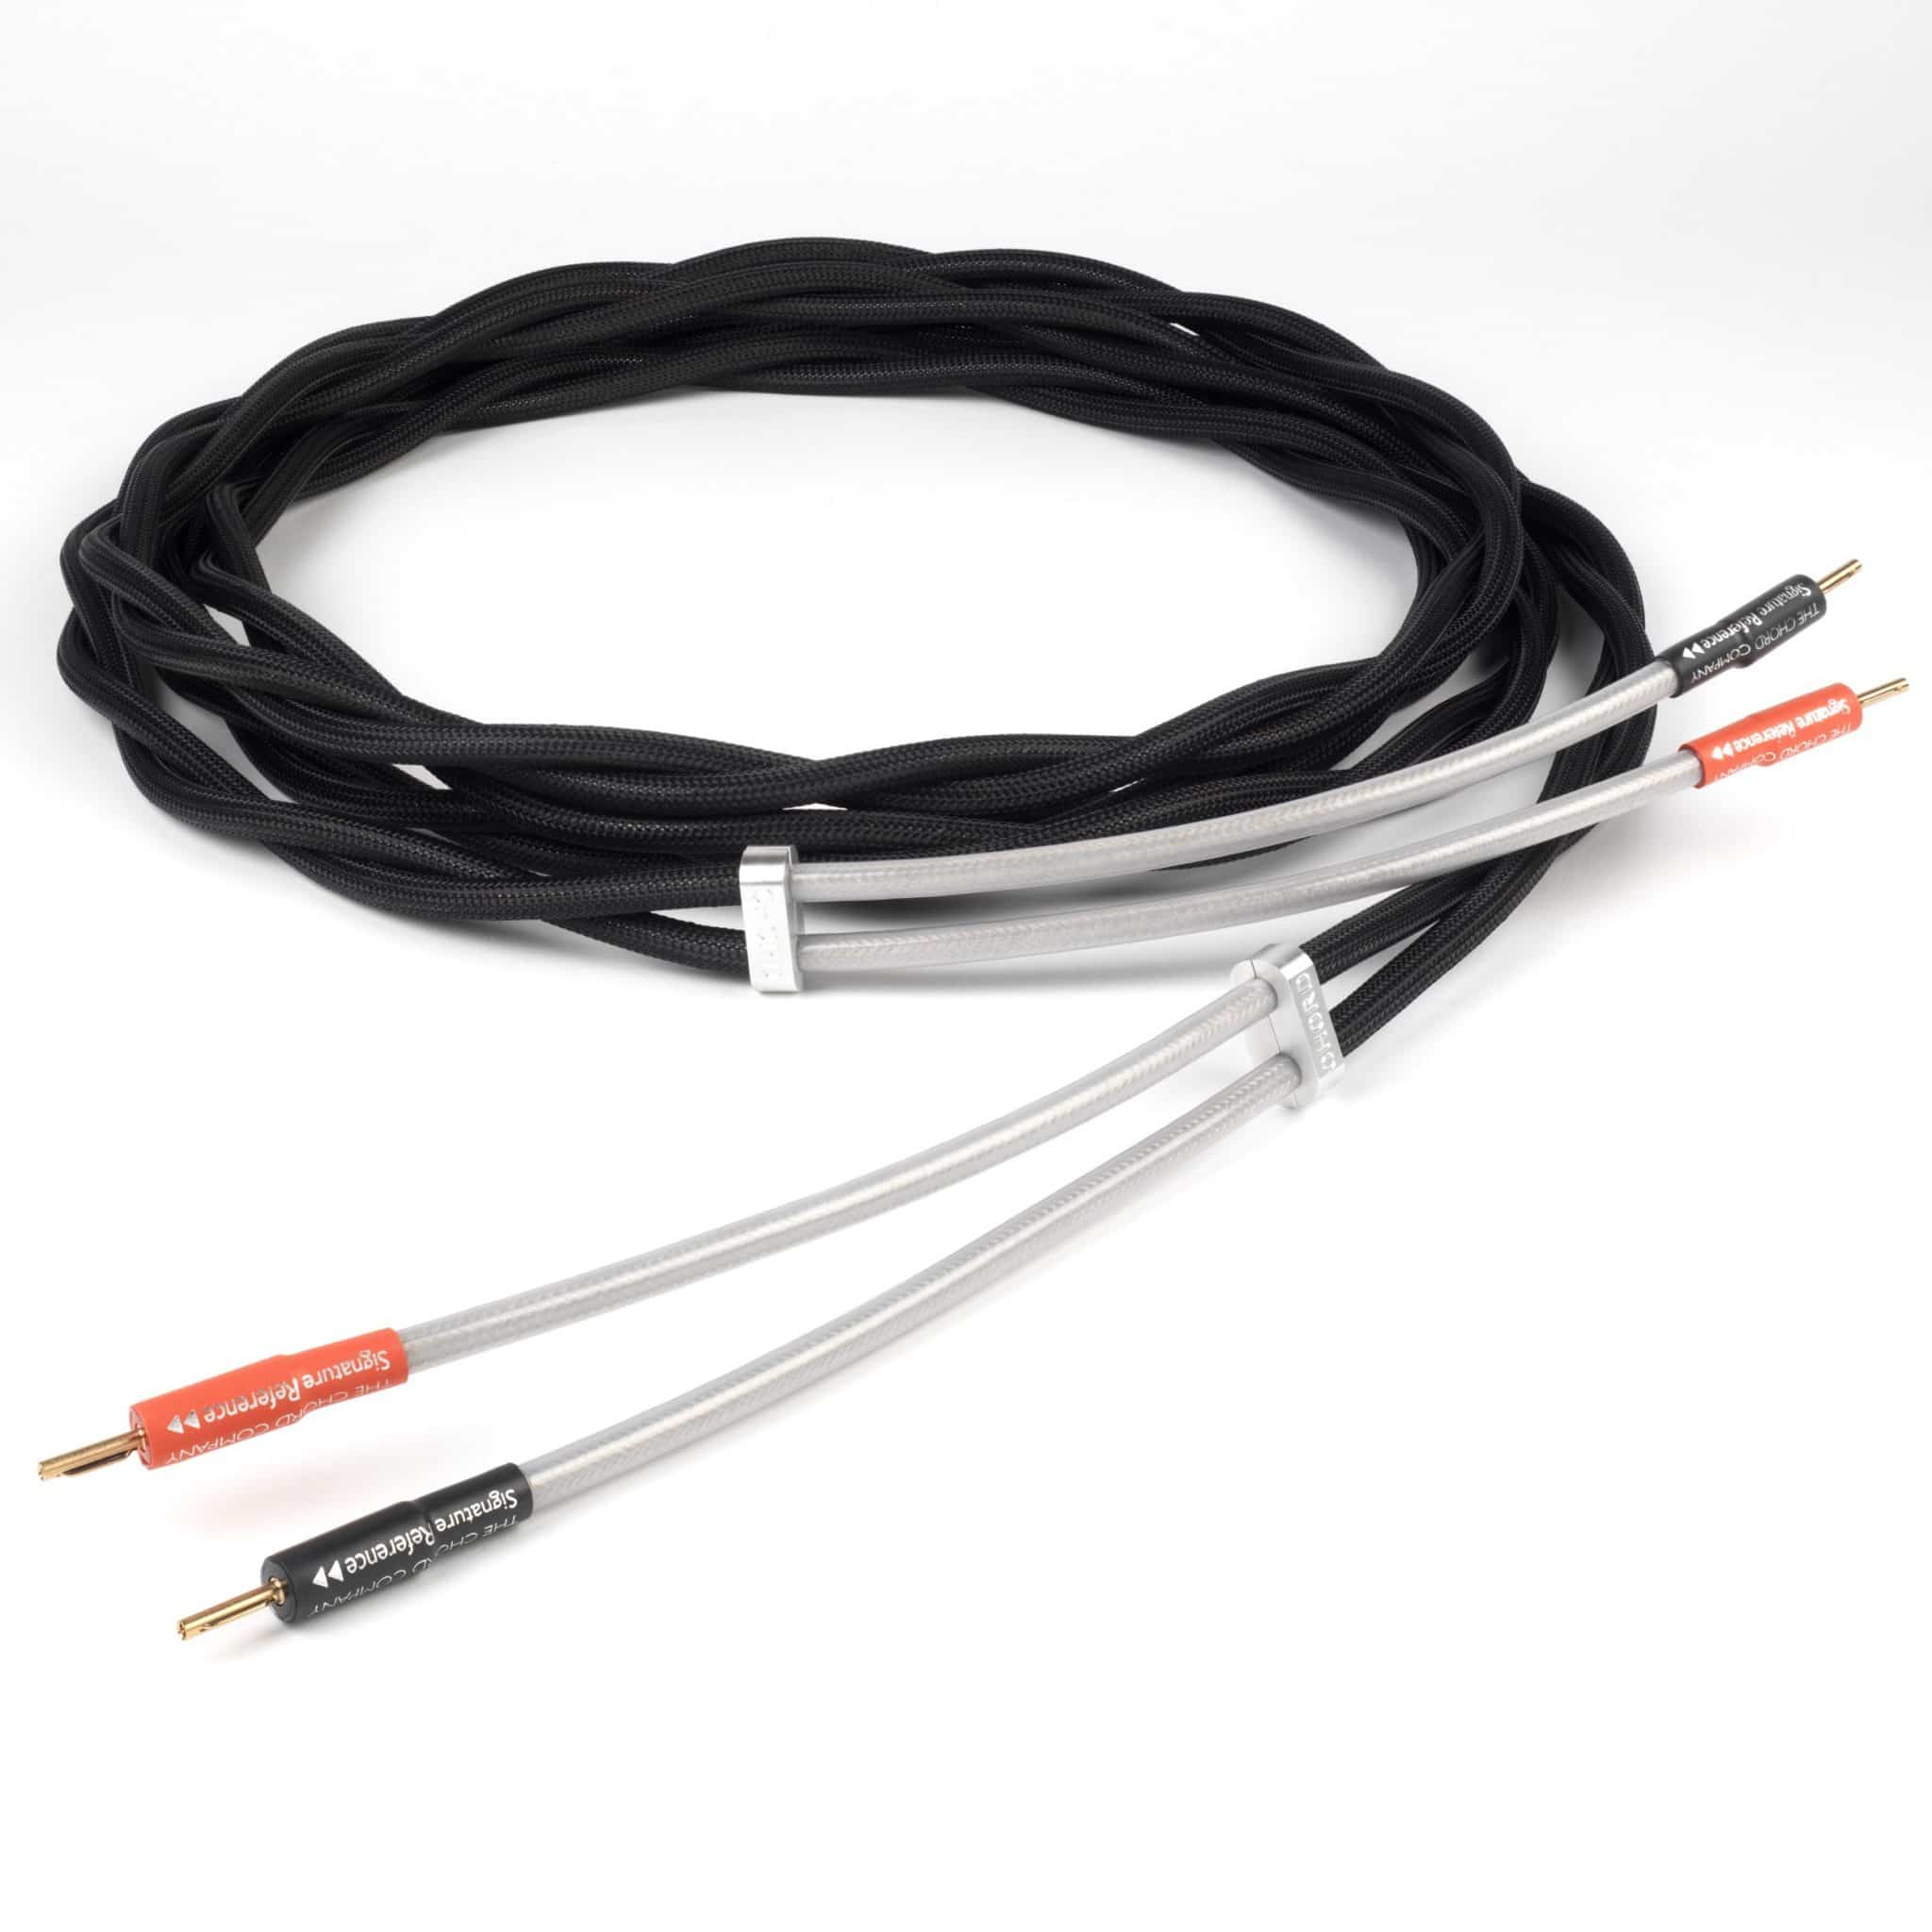 Signature Reference Speaker Cables From Chord